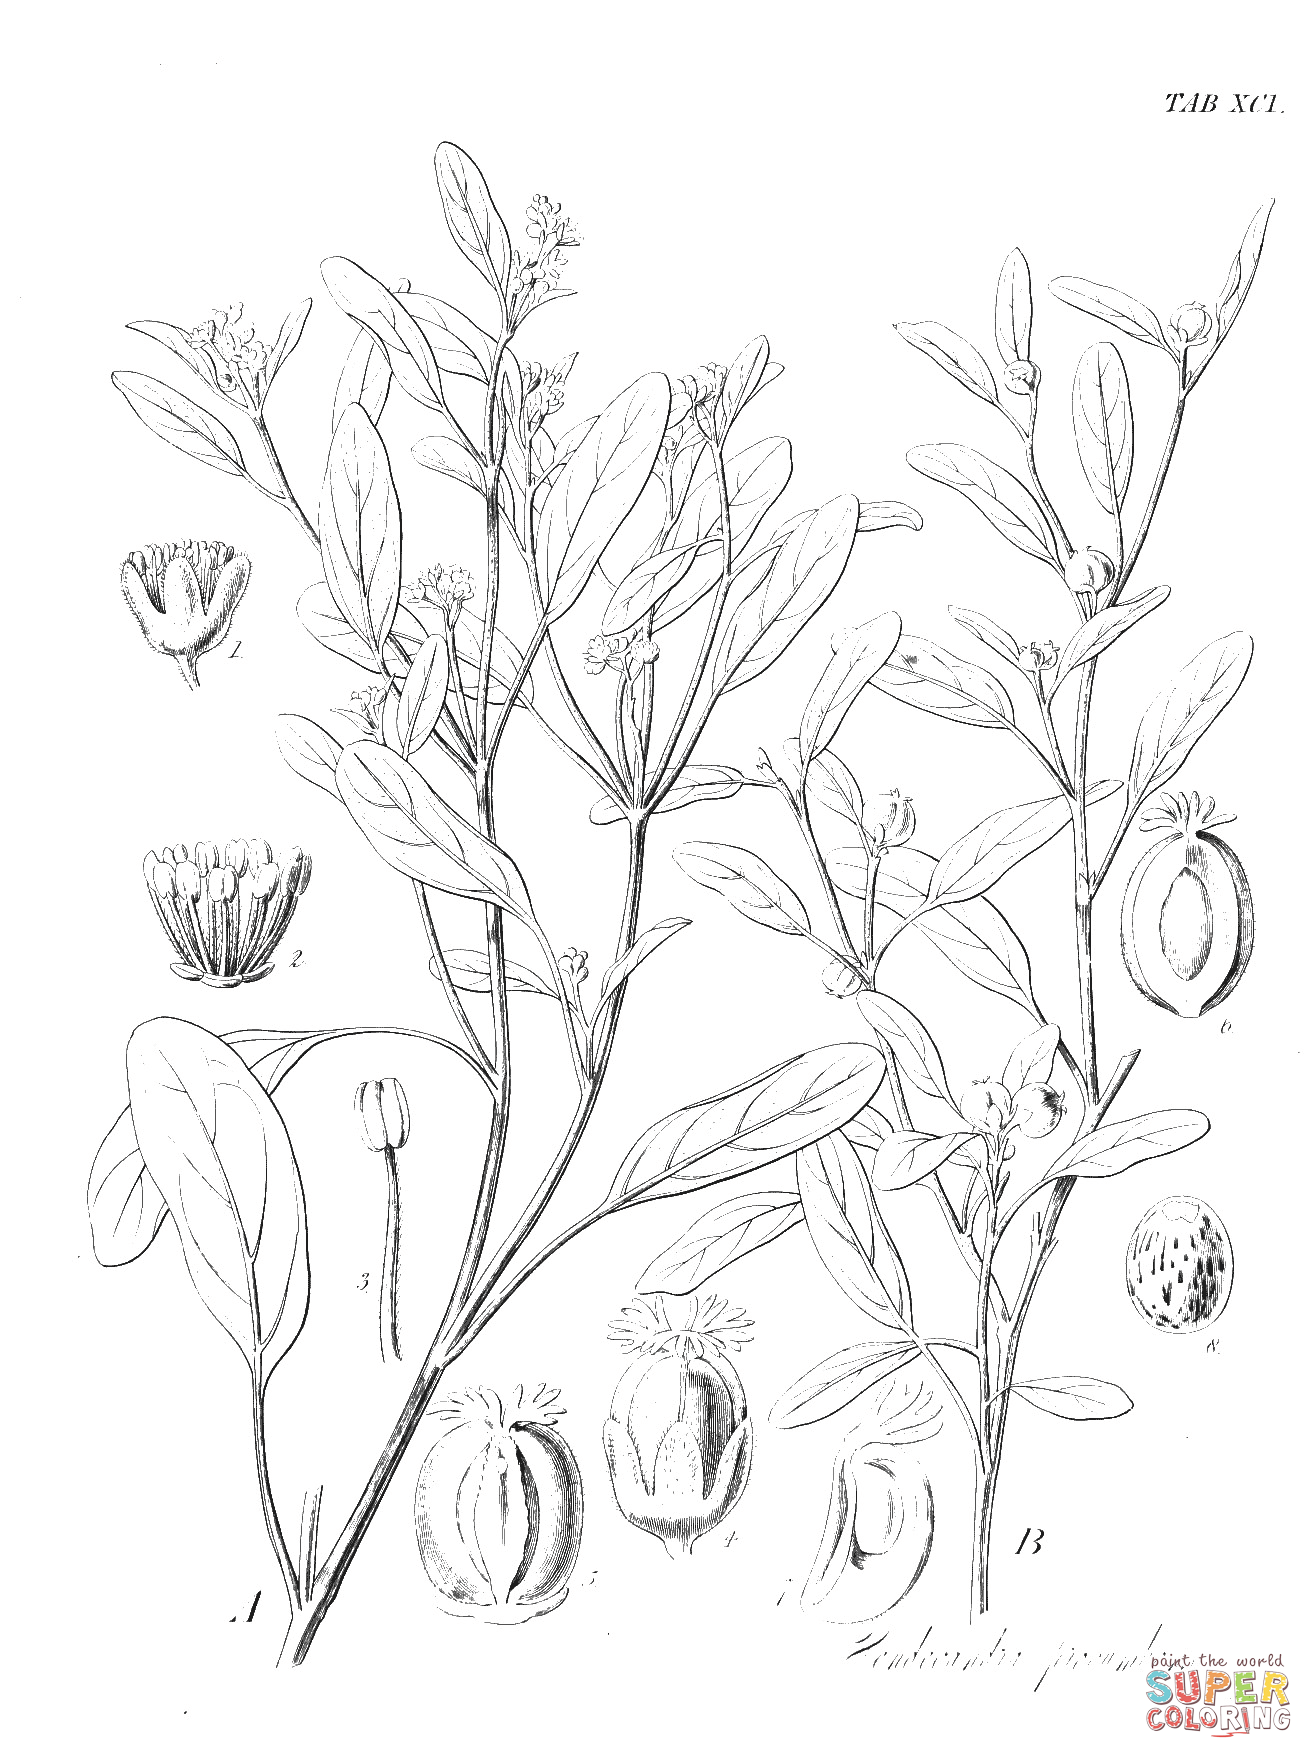 Vintage Botanical Illustration coloring page | Free Printable Coloring Pages